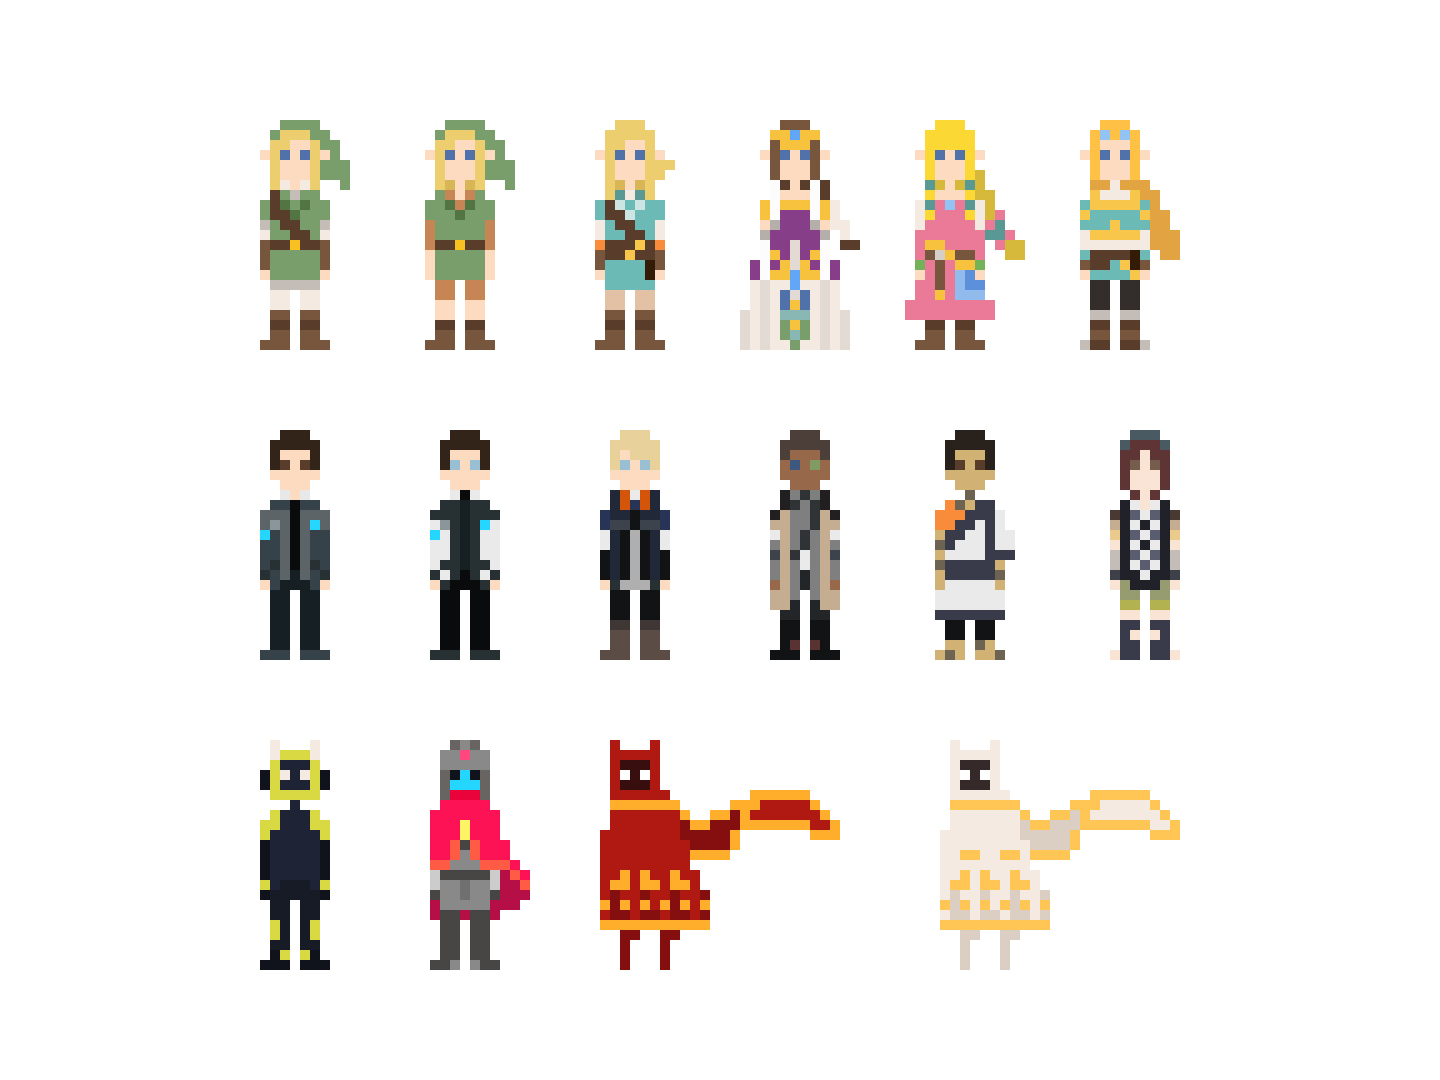 Pixel Art Character Generator Please post the images created in that